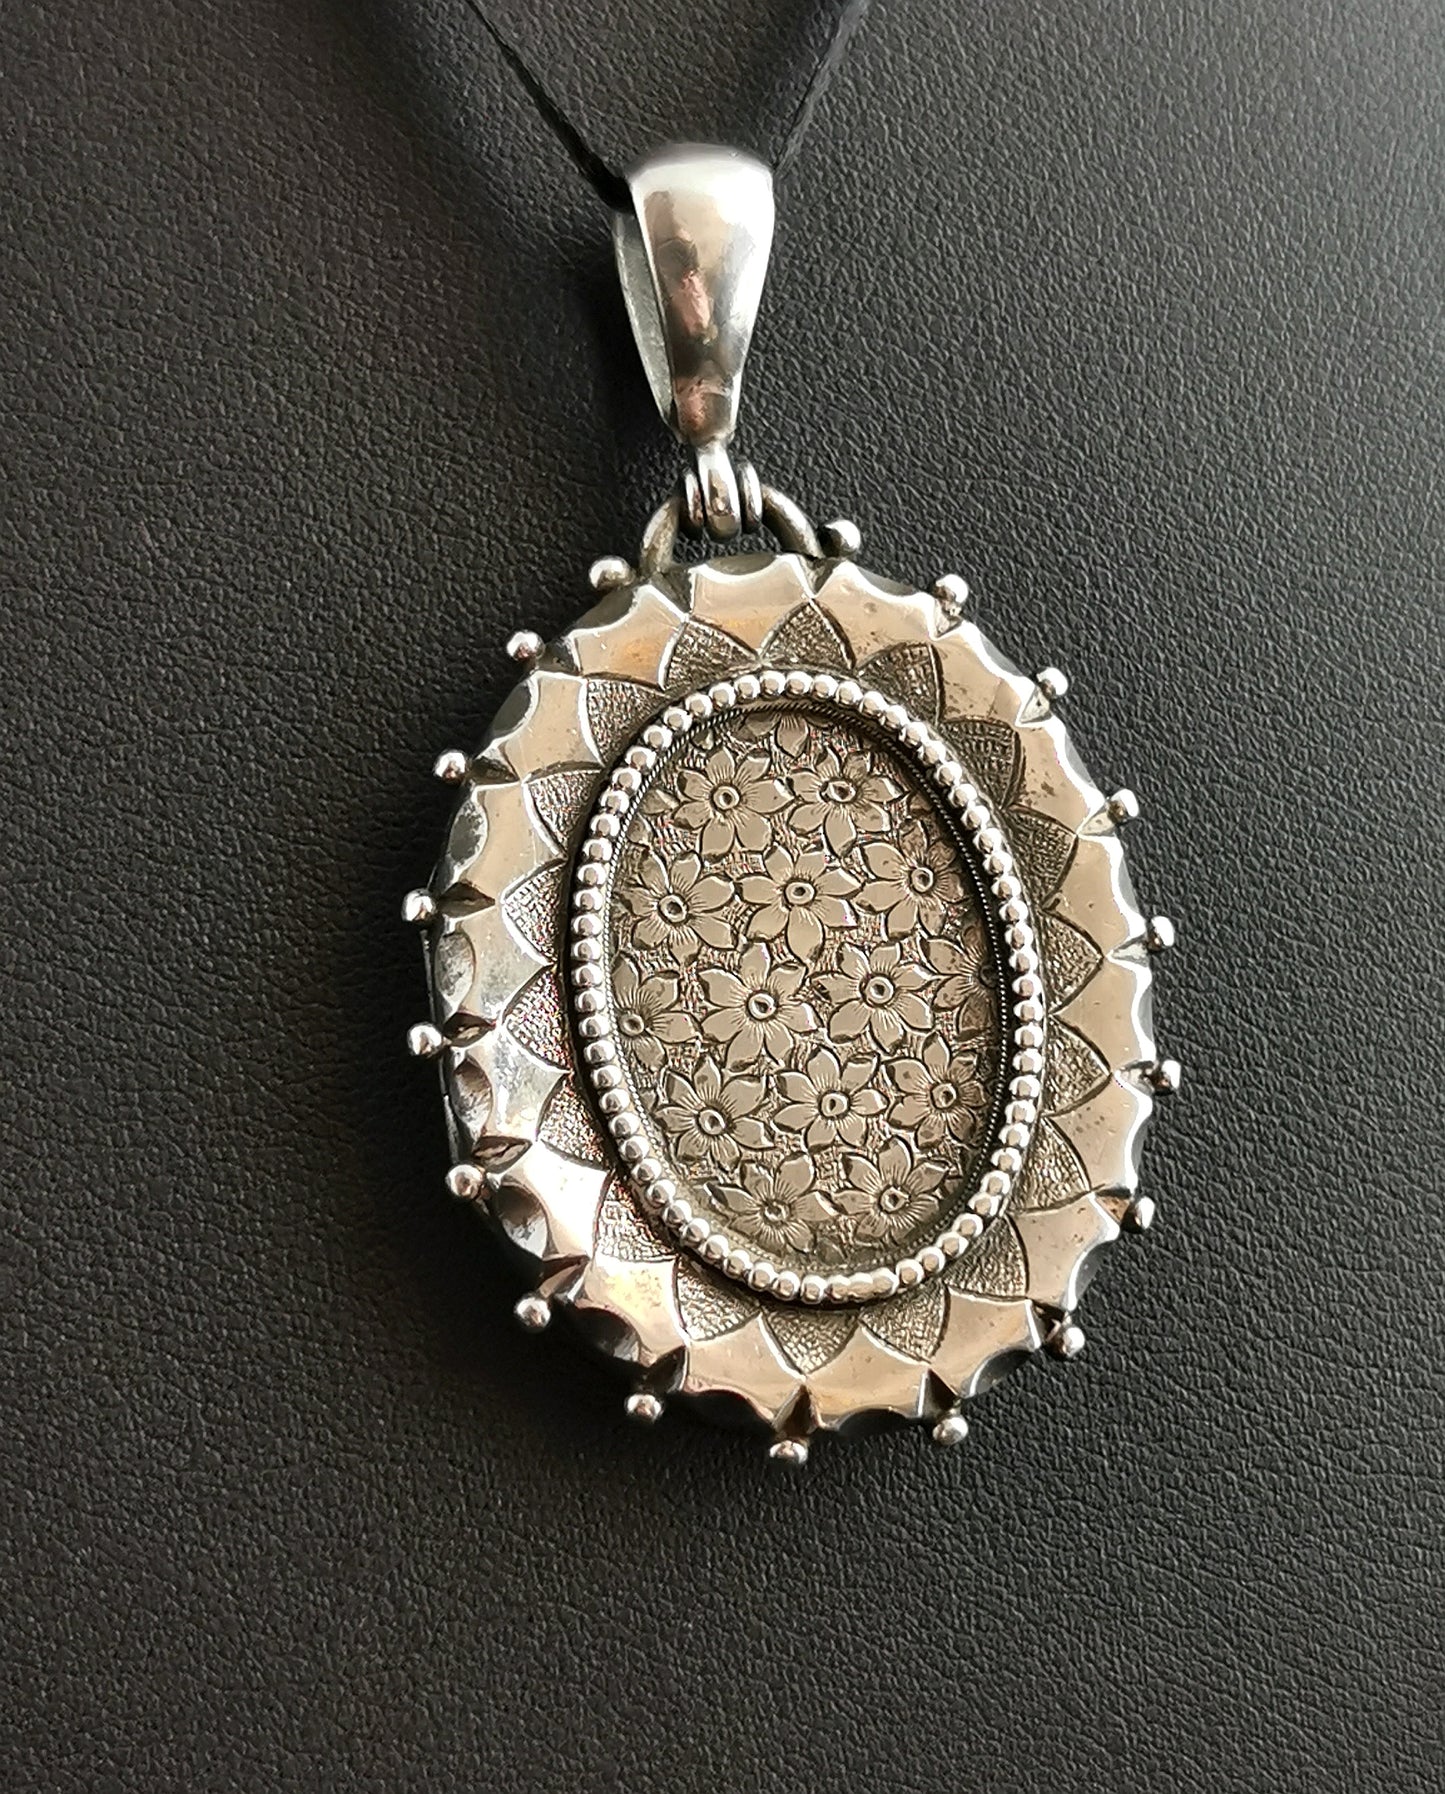 Antique Victorian silver locket pendant, Forget me not flowers